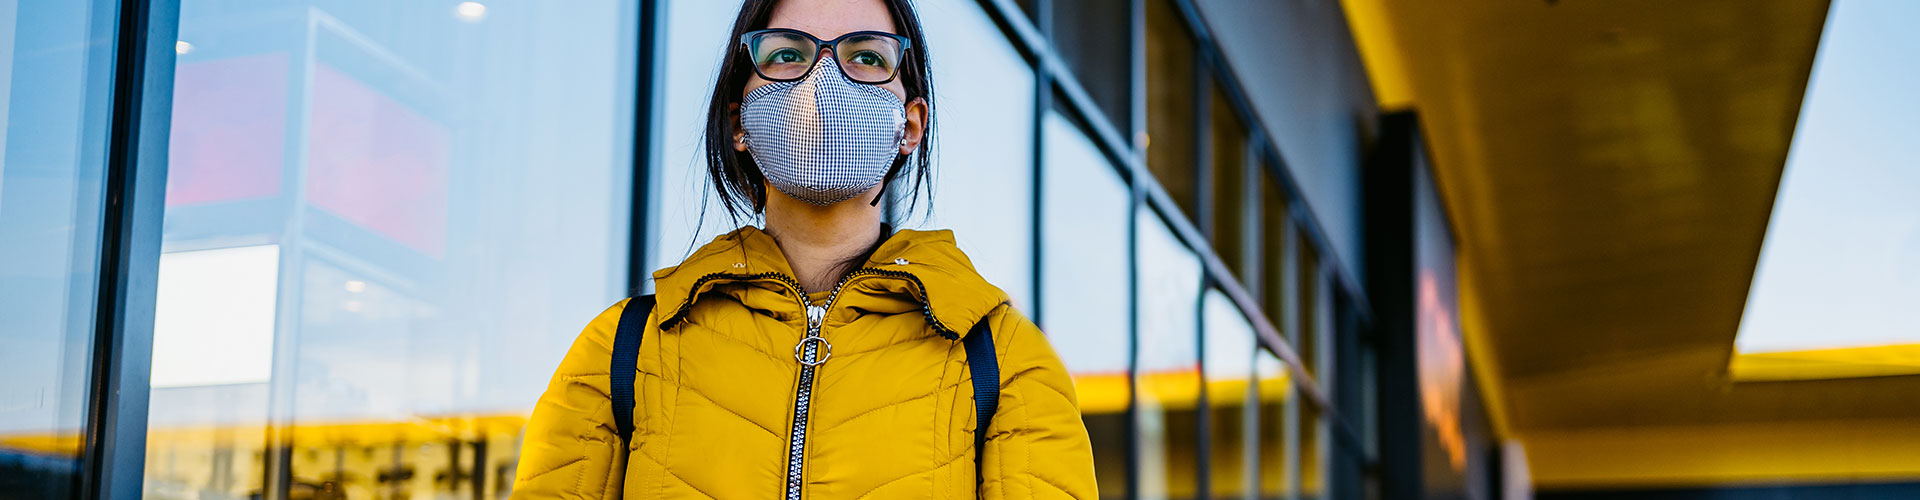 Webinar: How America Shops® In a COVID-19 Crisis blog banner featuring woman in mask and a yellow puffer jacket pushing a shopping cart